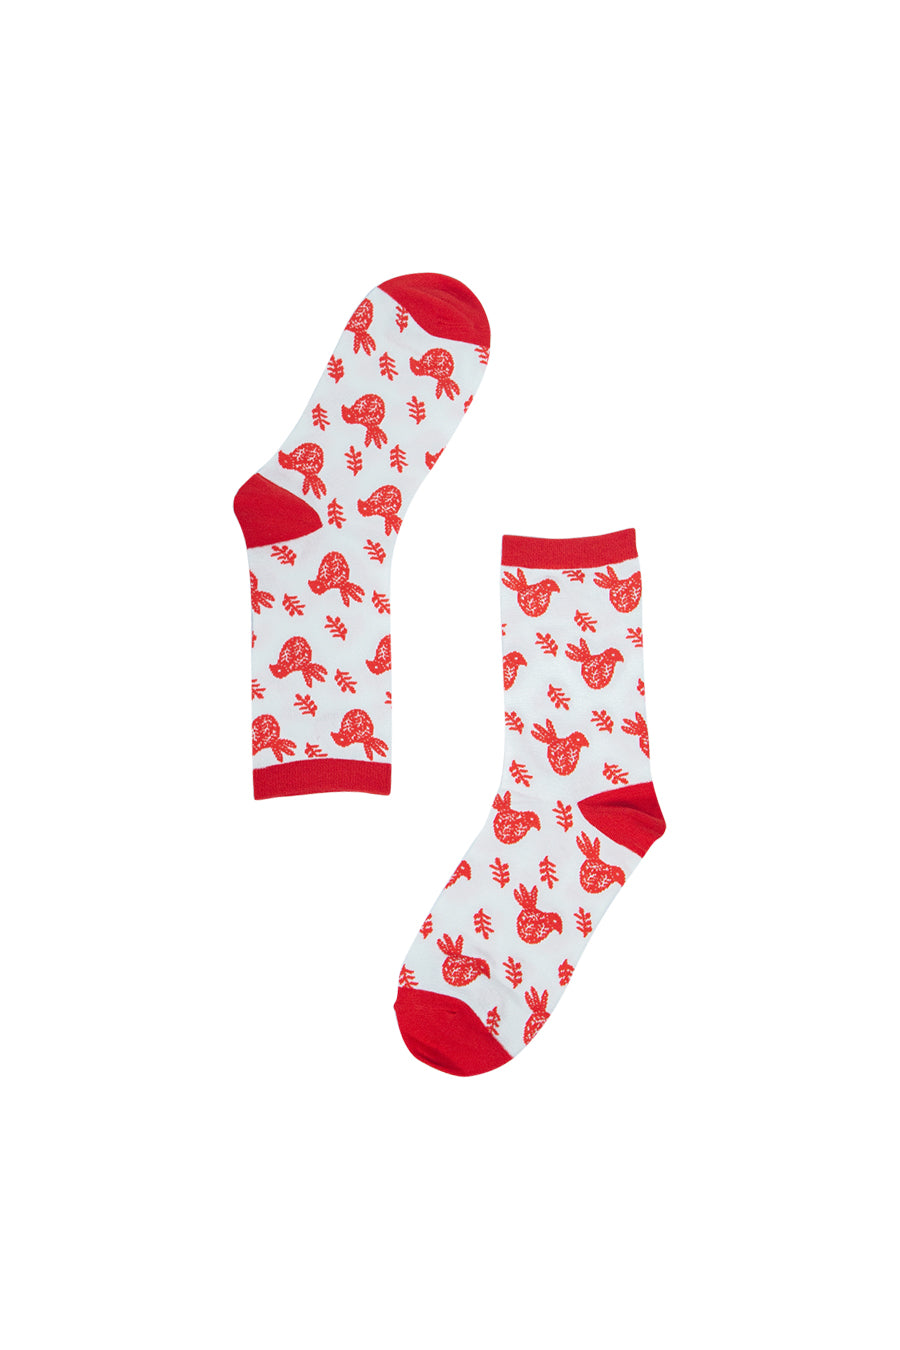 white bamboo socks with red scandi birds all over them